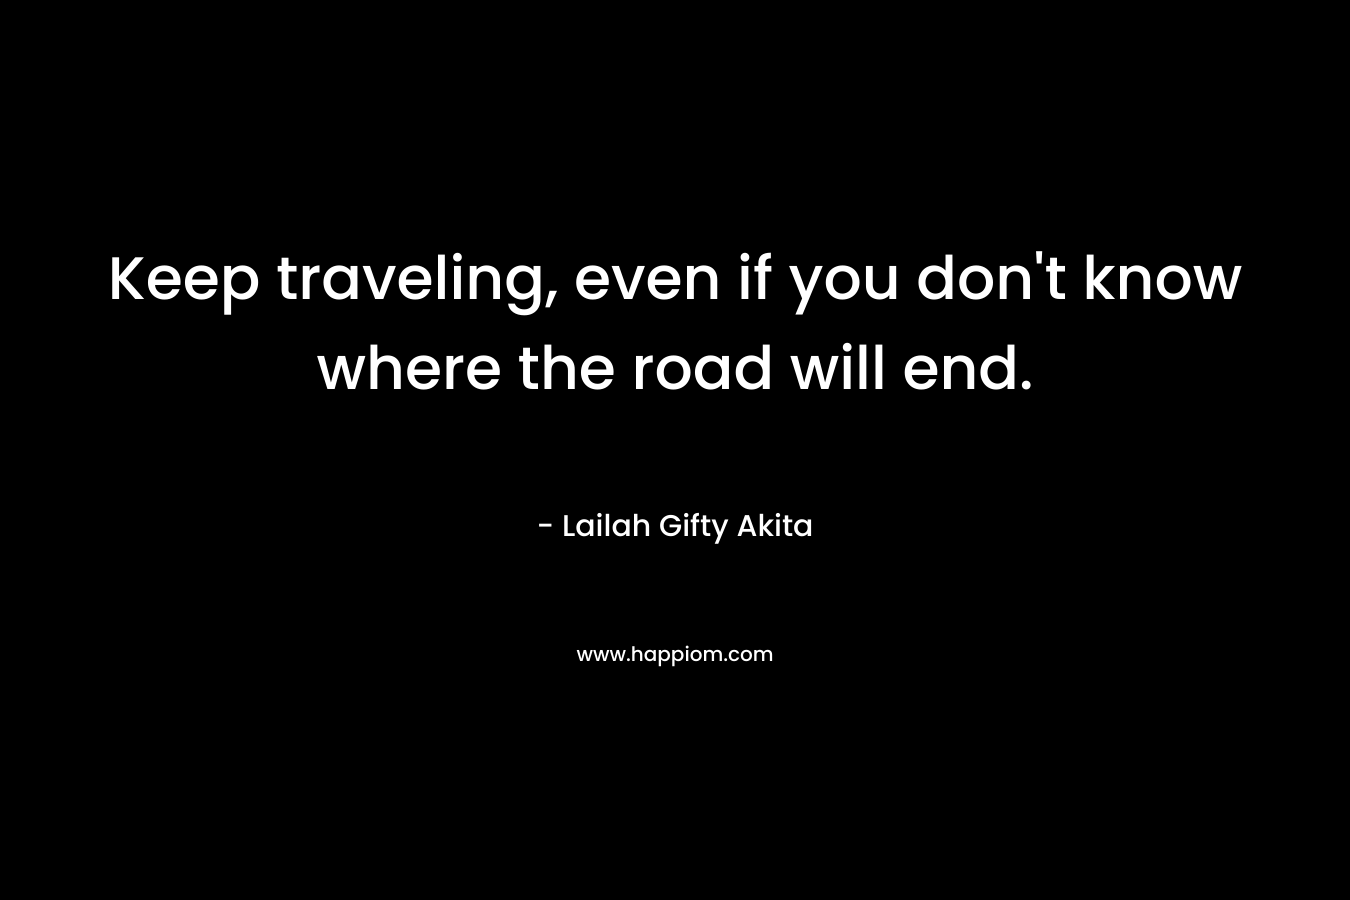 Keep traveling, even if you don't know where the road will end.